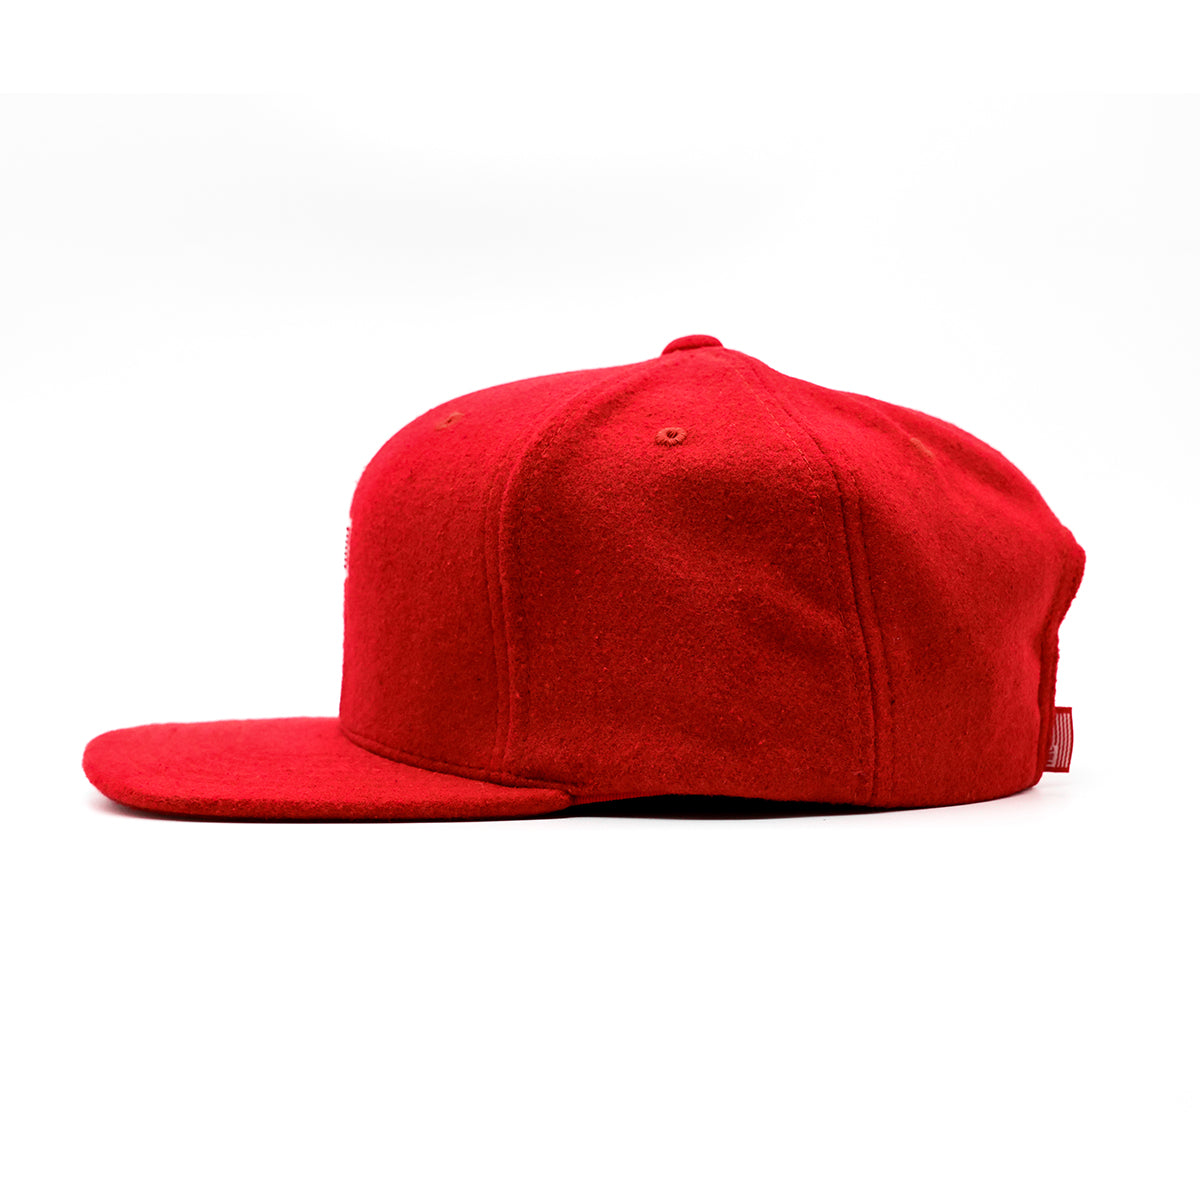 TMC Flag Limited Edition Snapback - Red - Side